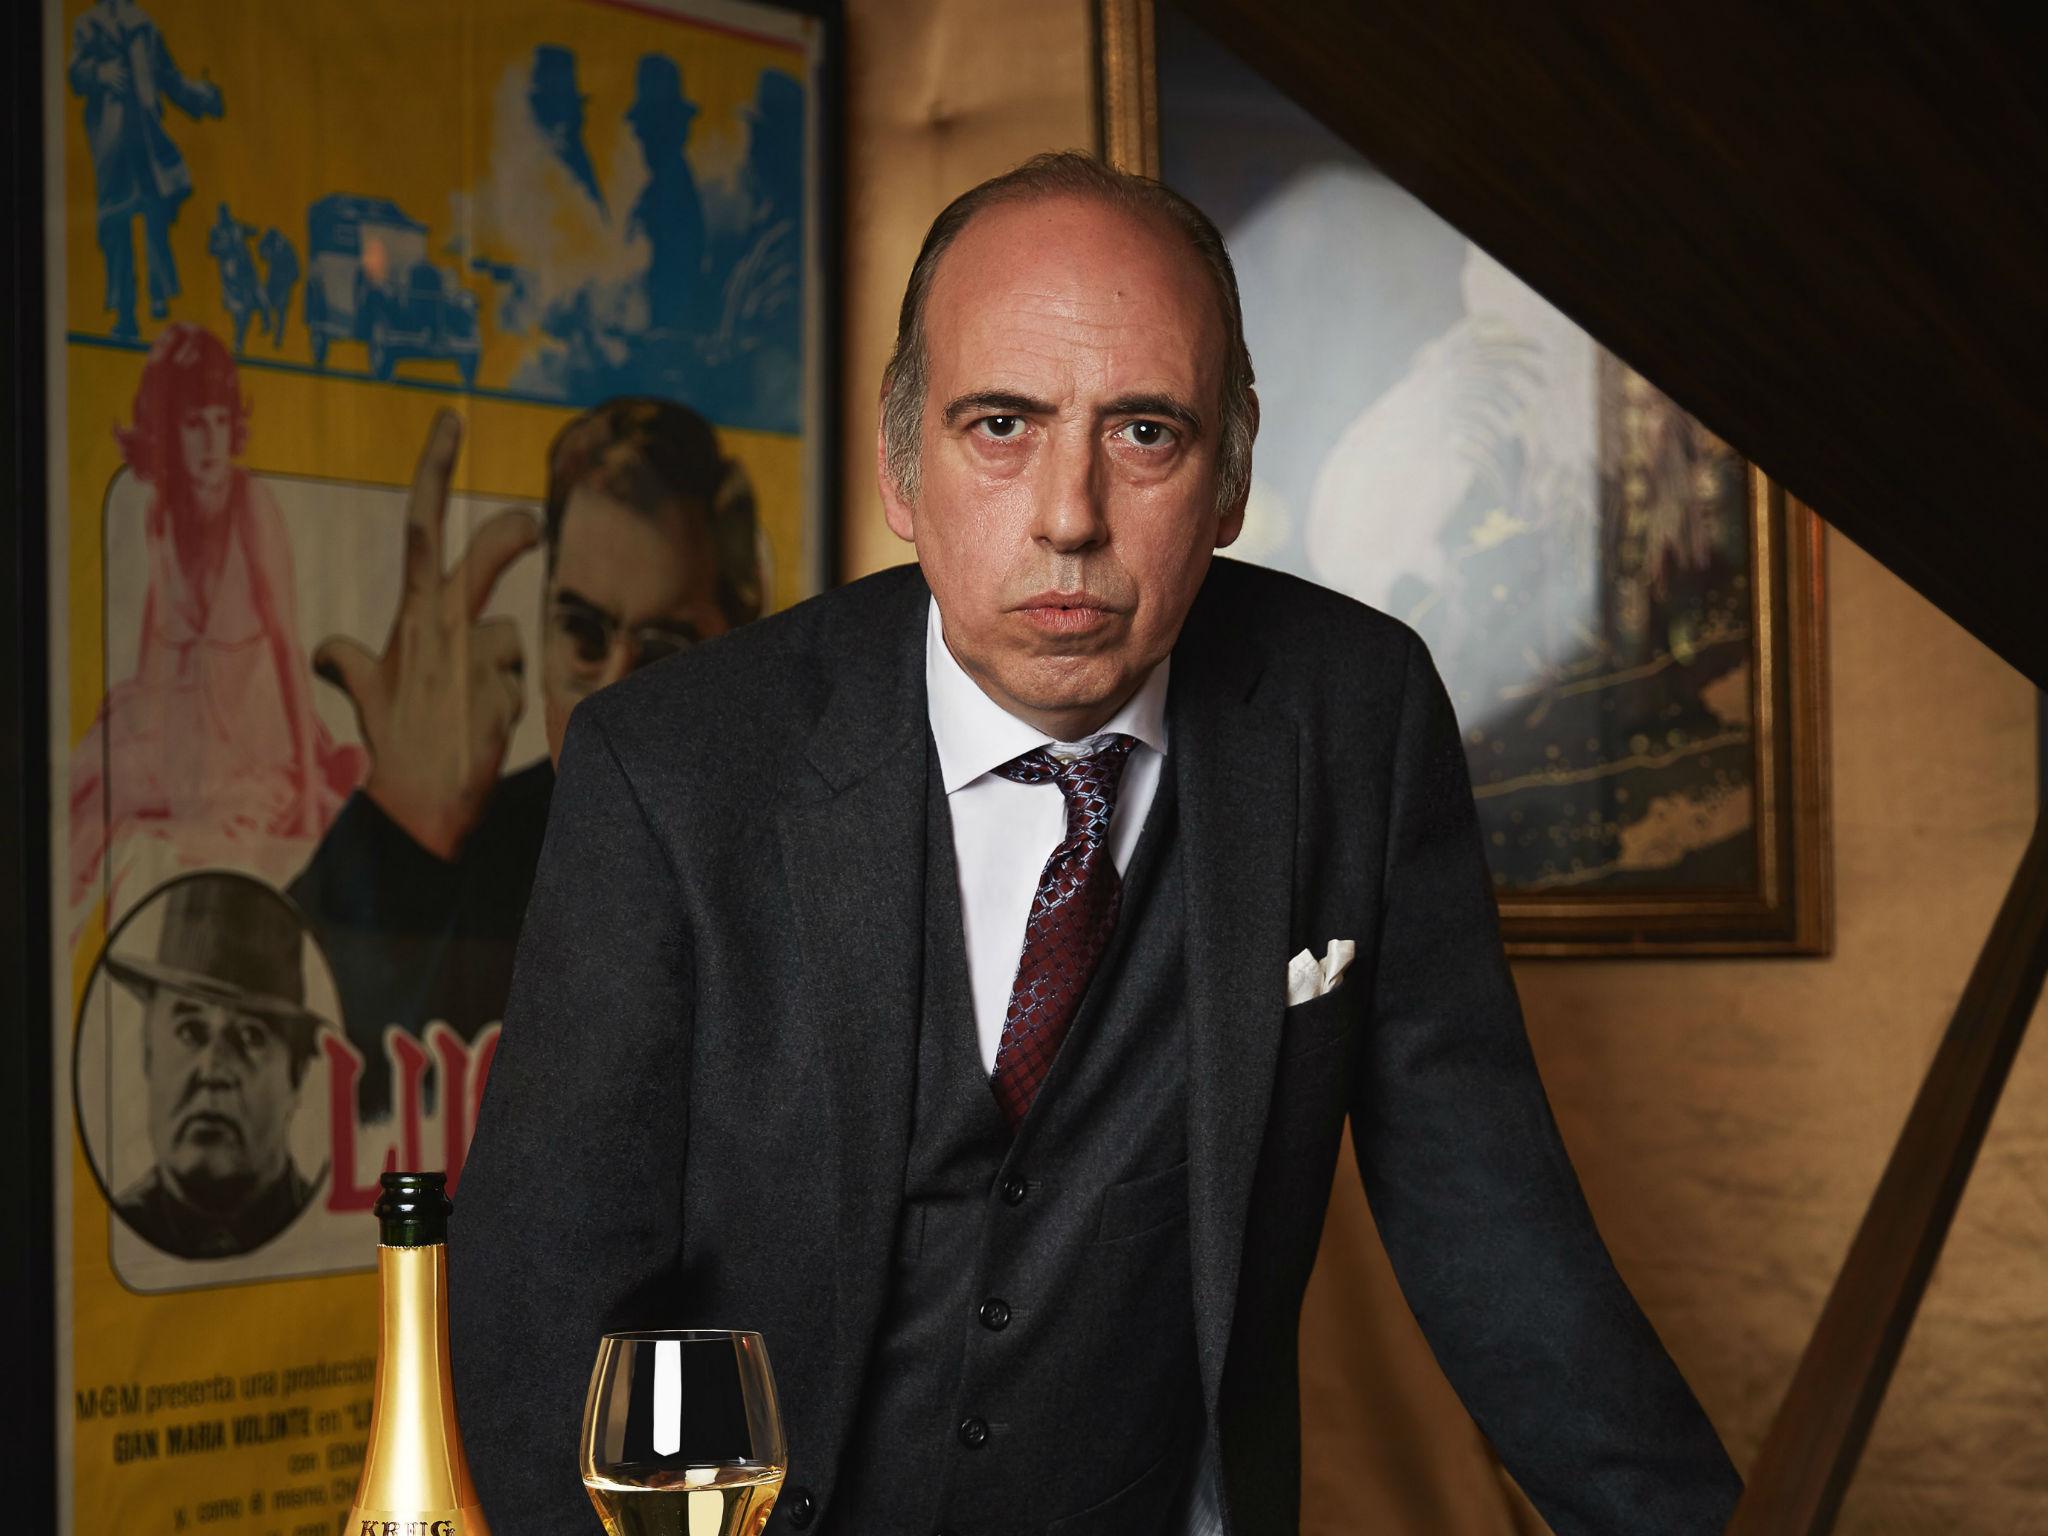 Mick Jones of The Clash curates new music event Krug Island The